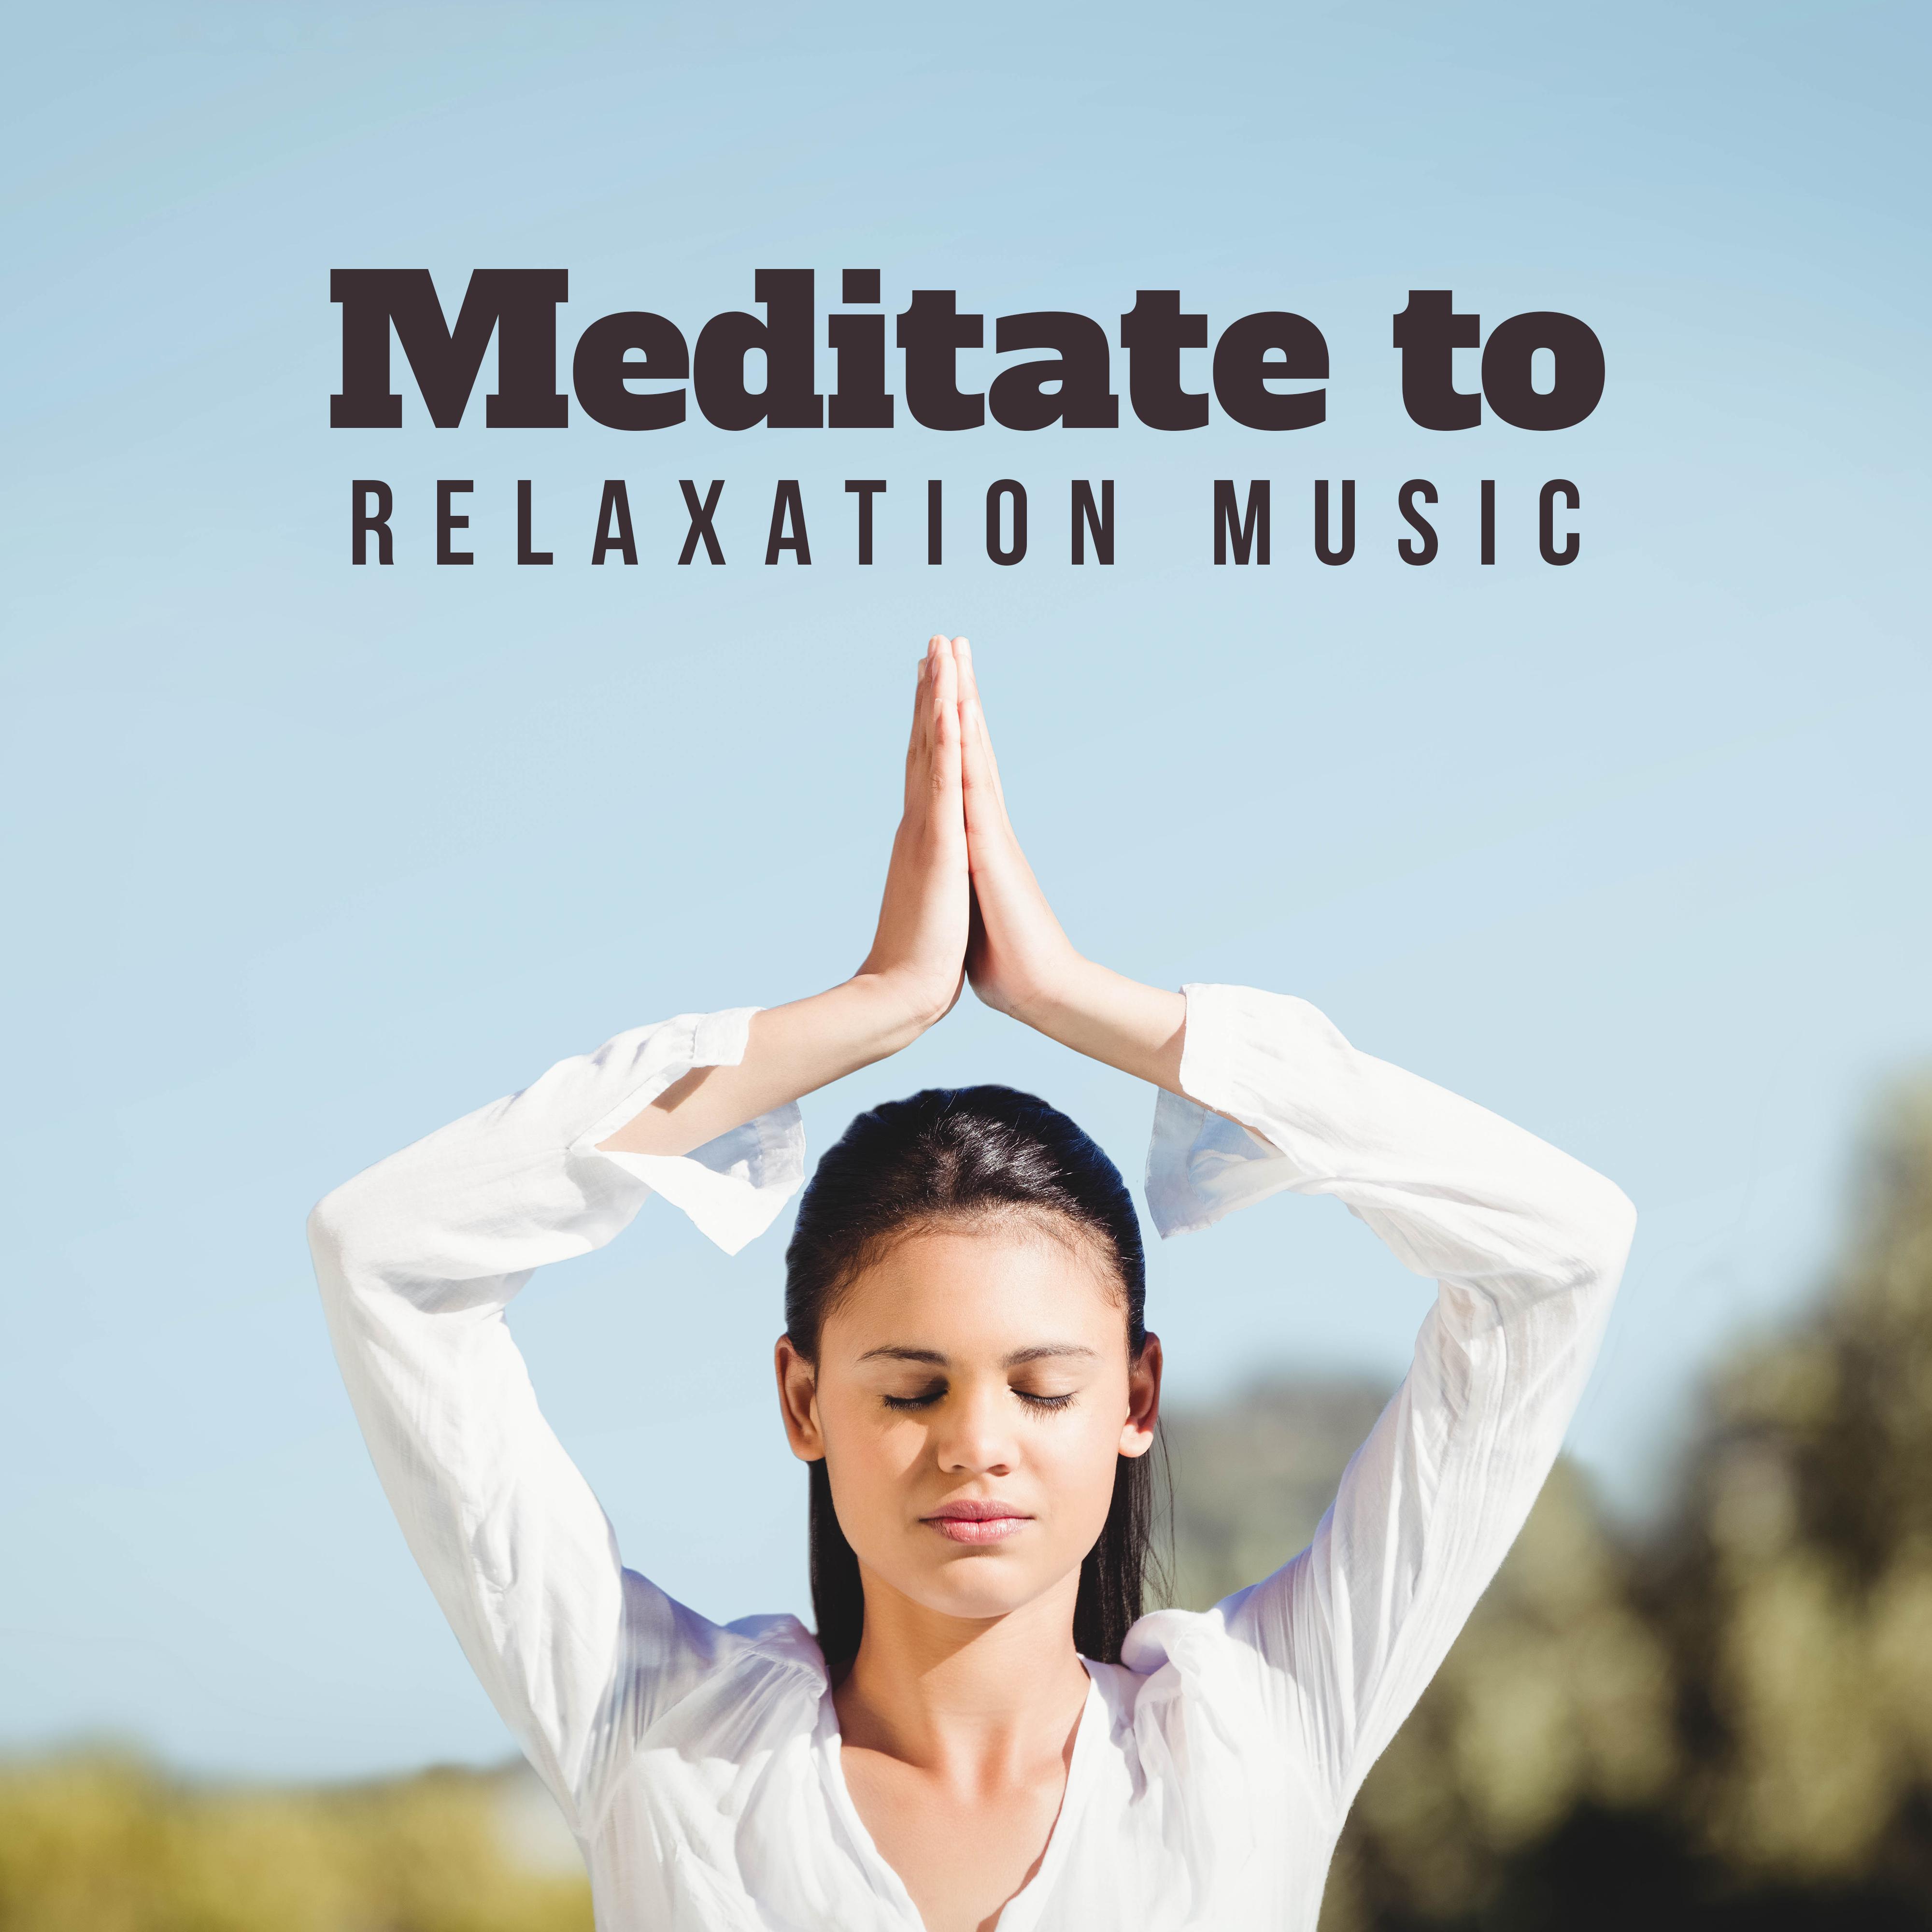 Meditate to Relaxation Music: Spiritual Vibrations, Mindfulness Relaxation, Mantra Music for Meditation, Music Zone, Inner Harmony, 15 Meditation Tones